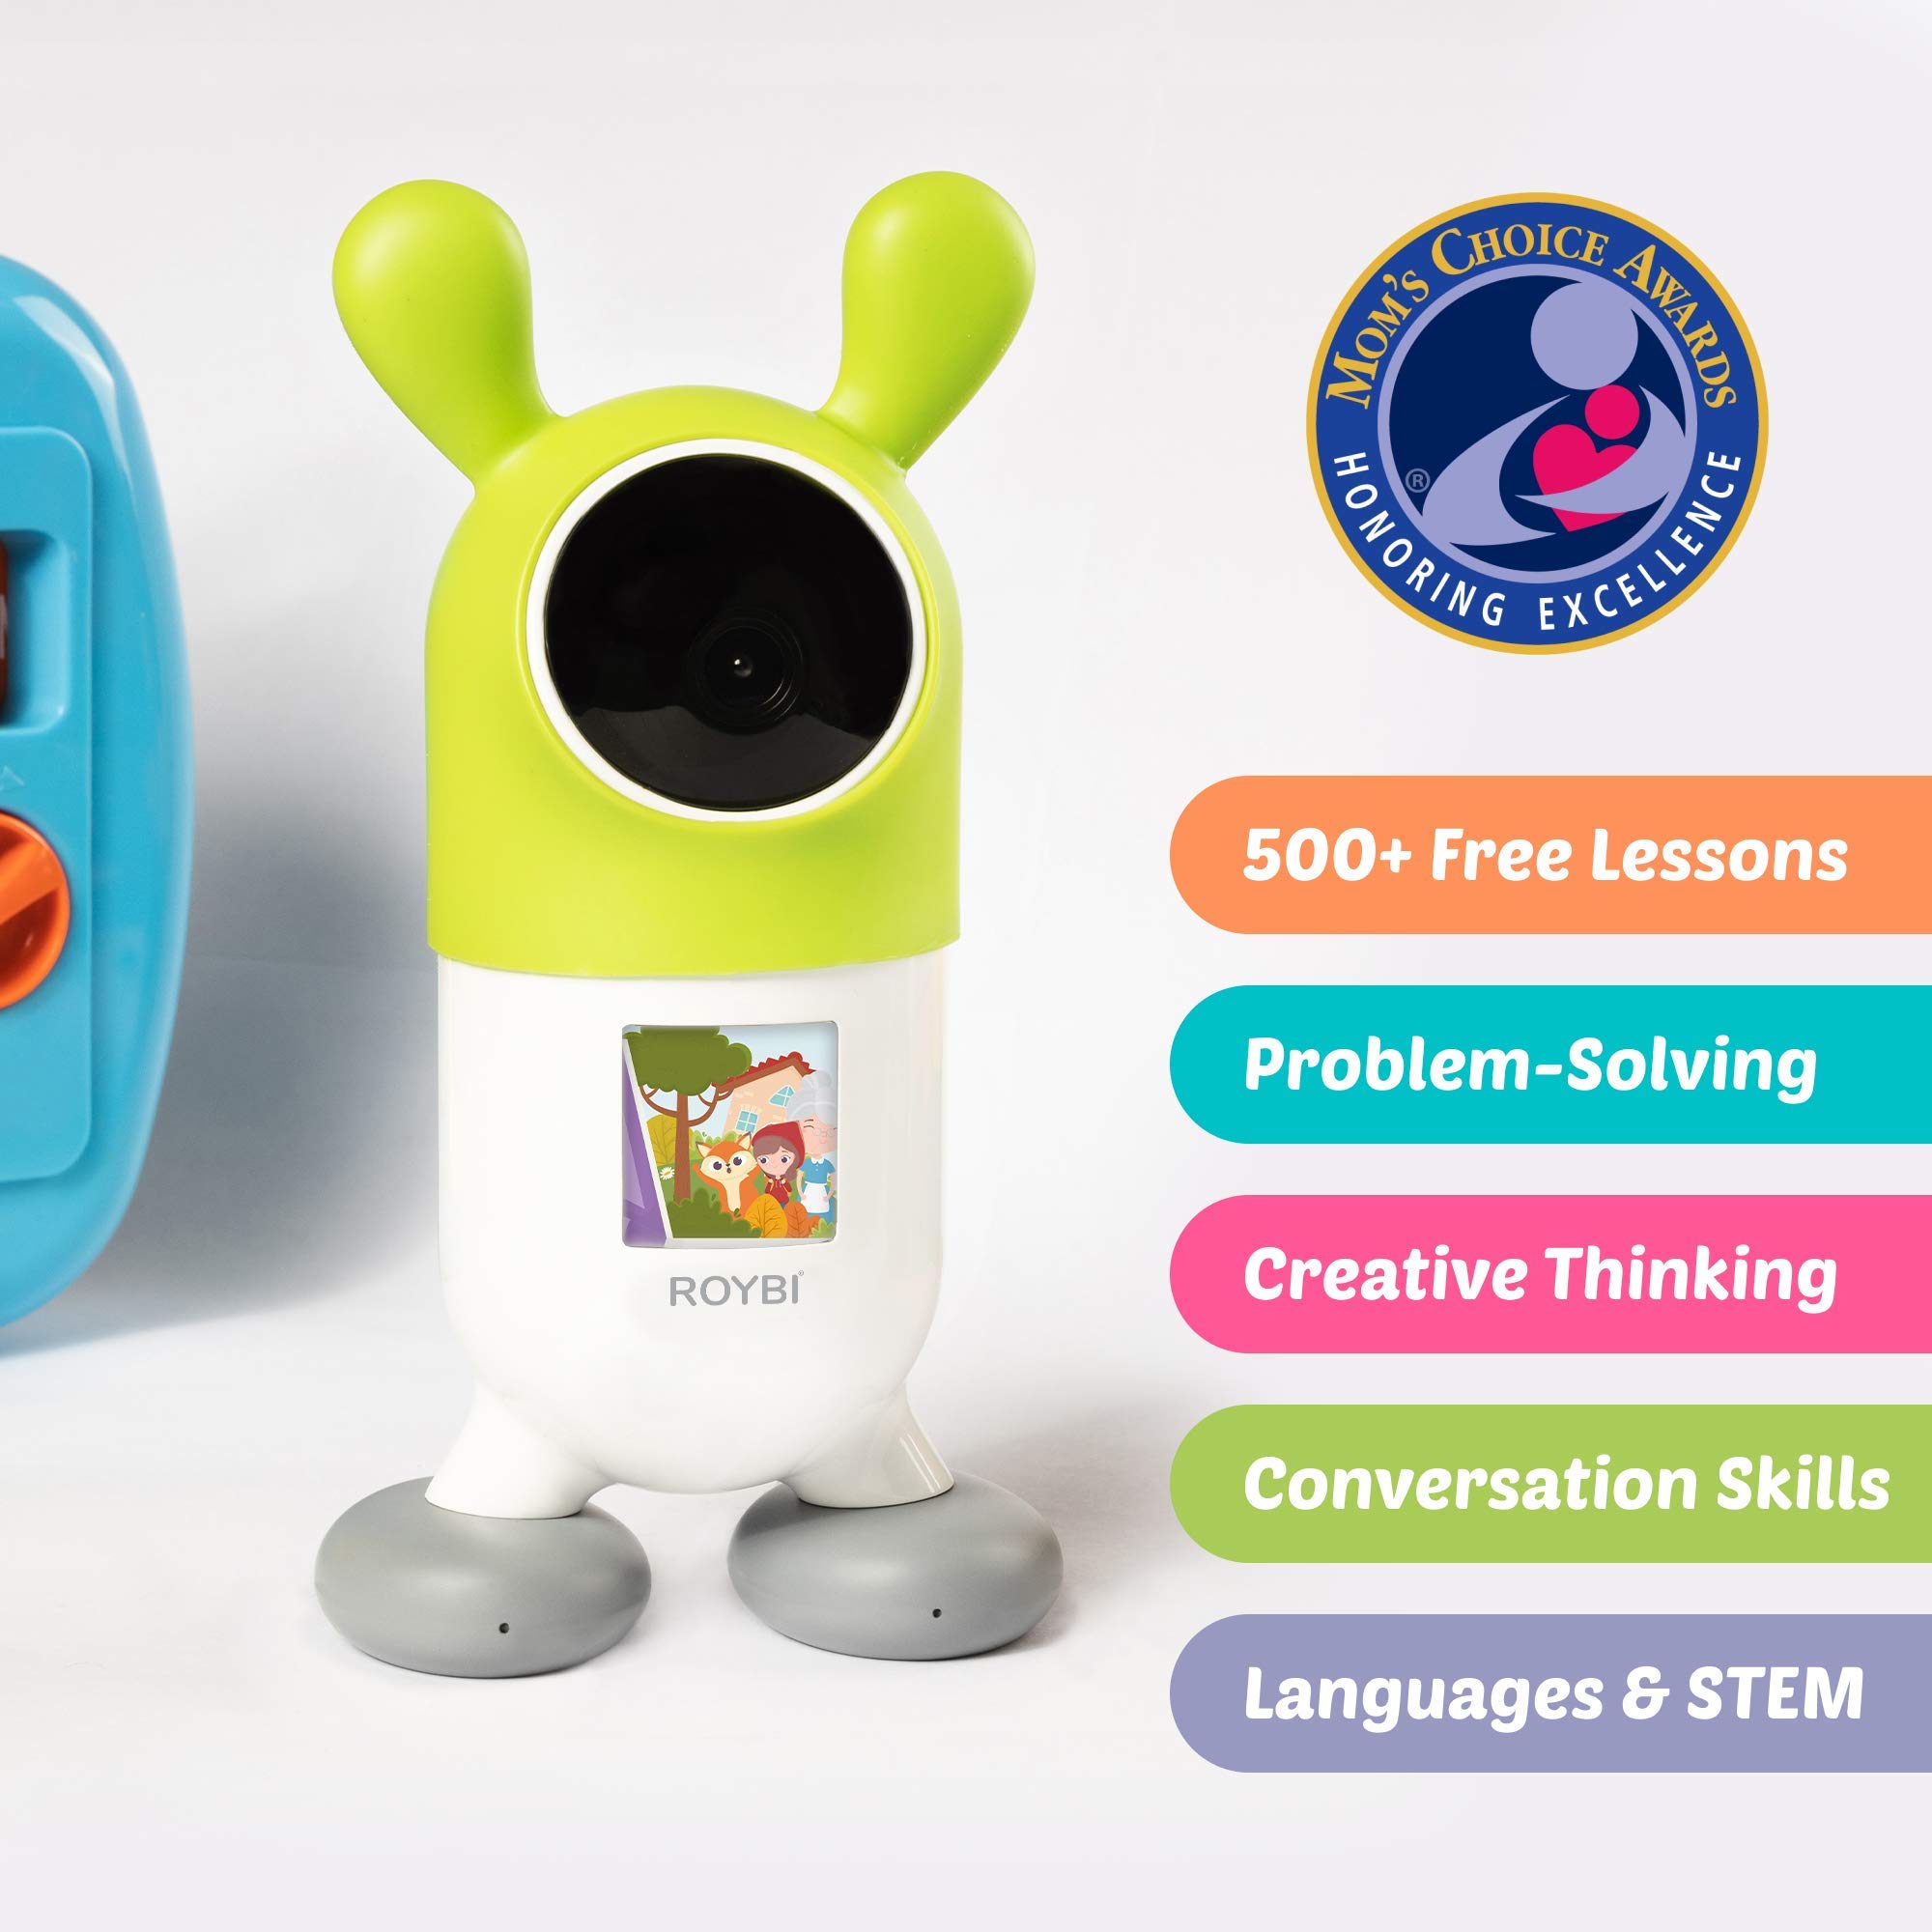 ROYBI Robot Smart Kids Educational Companion Toy for Preschool STEM Language Learning | Teaching English, Spanish, French, Chinese Over 1000 Interactive Activities & Stories